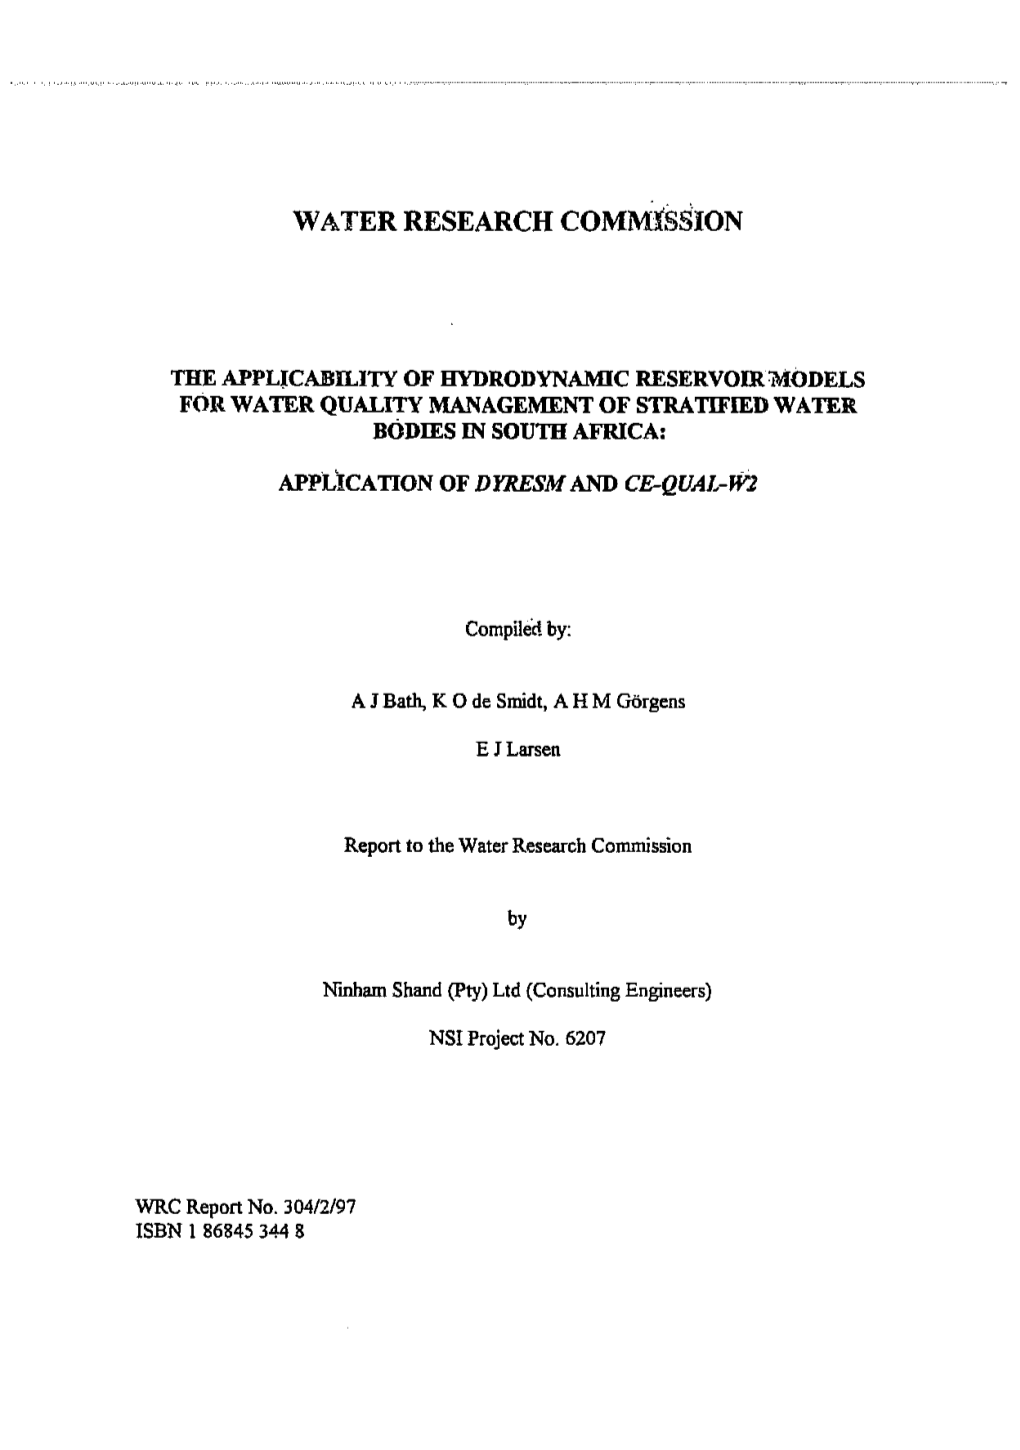 The Applicability of Hydrodynamic Reservoir Models for Water Quality Management of Stratified Water Bodies in South Africa